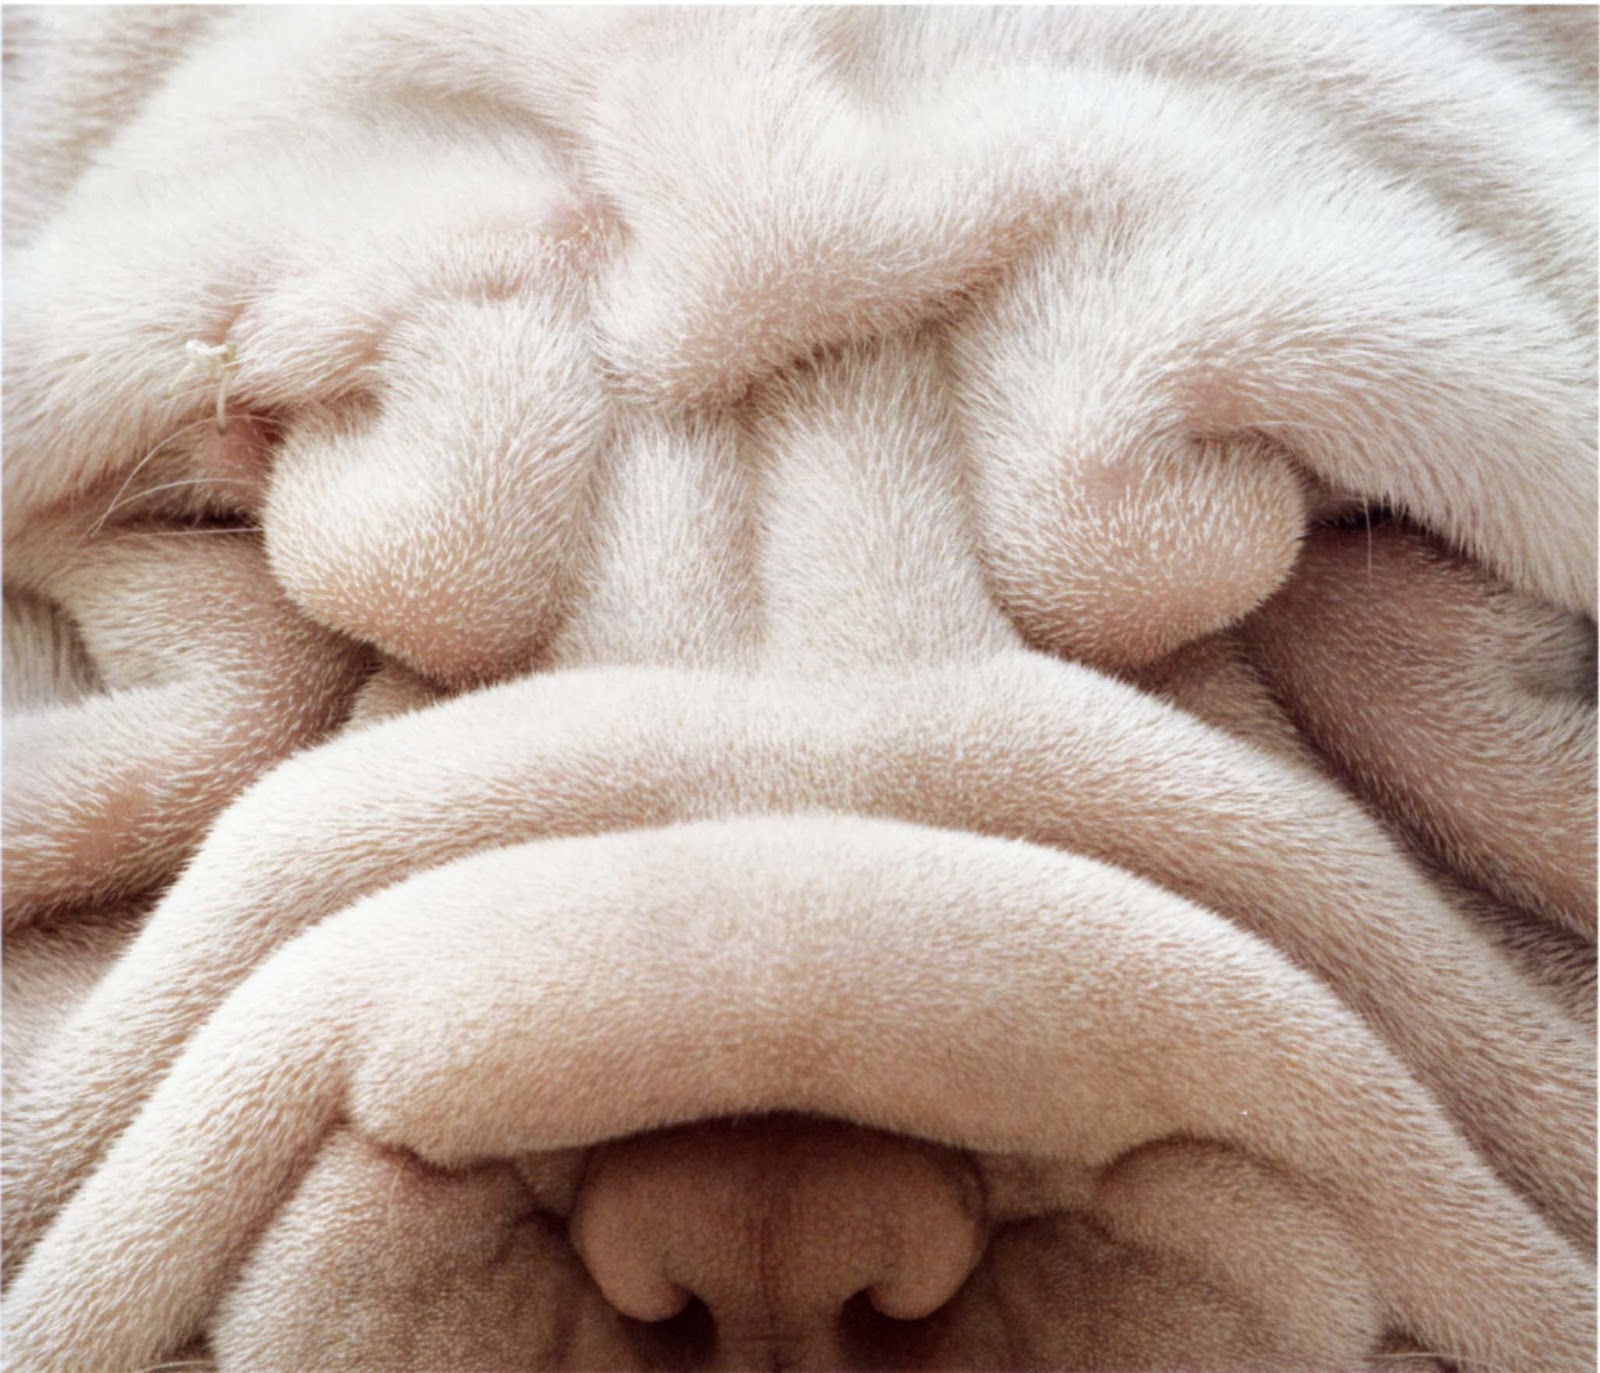 Pedigree Dogs Exposed - The Blog: Shar-peis. On a roll